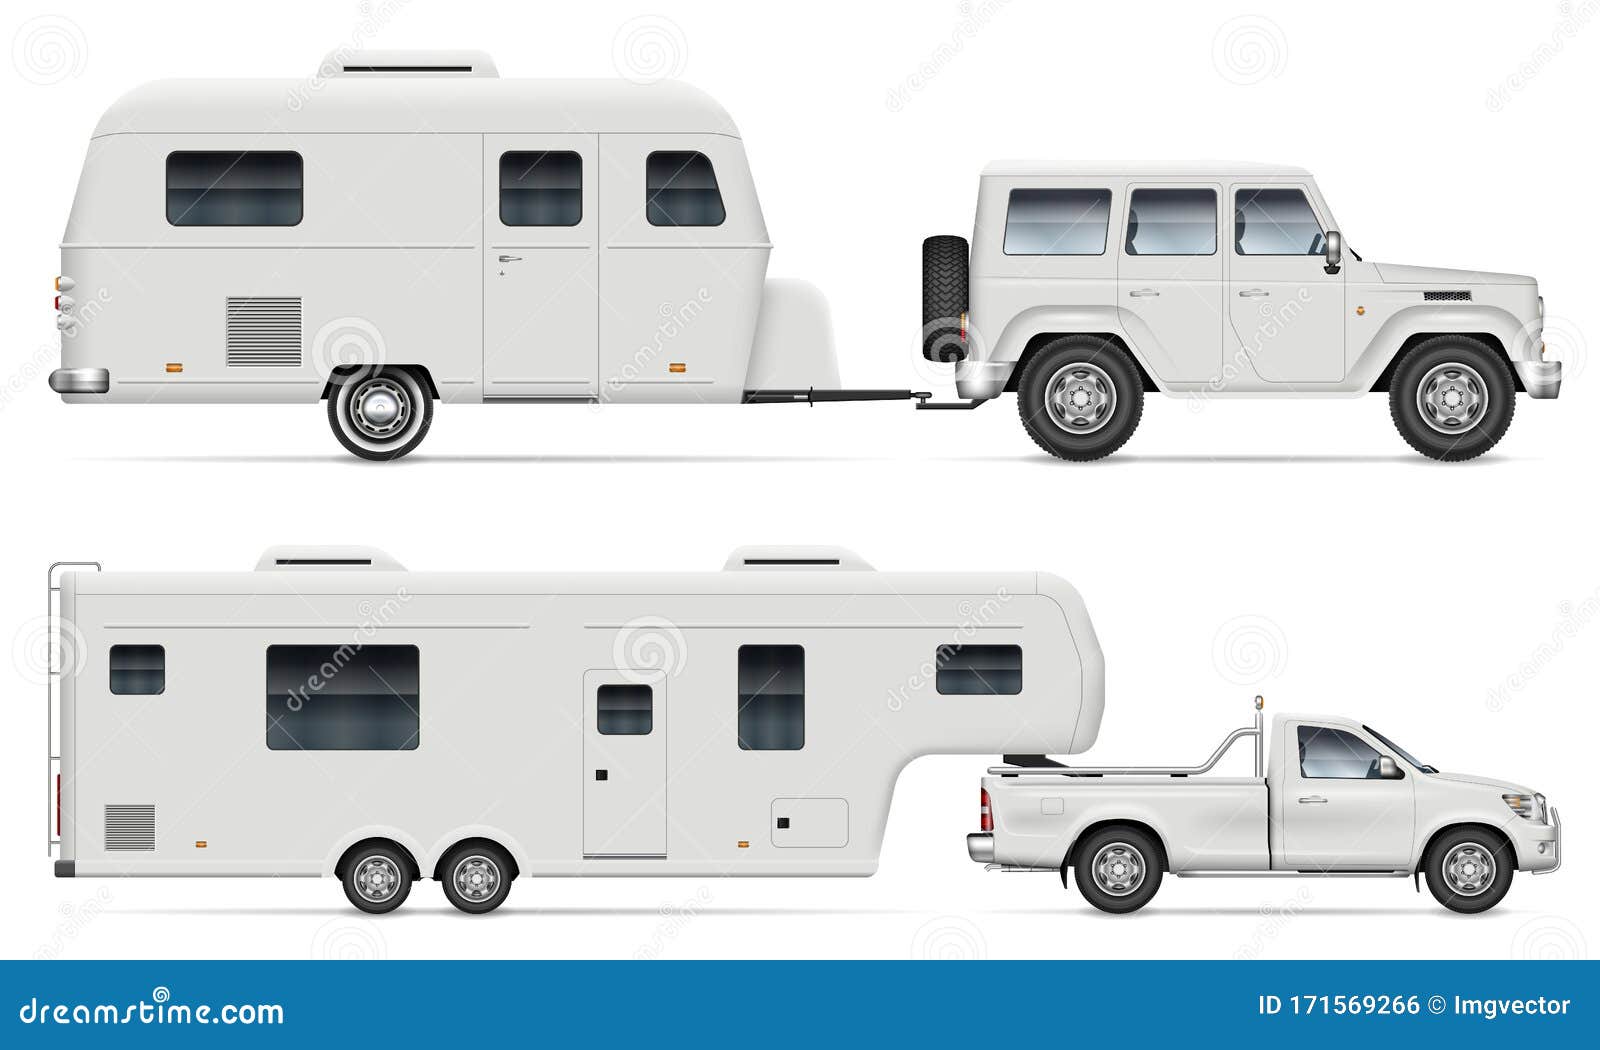 car with rv camping trailers side view